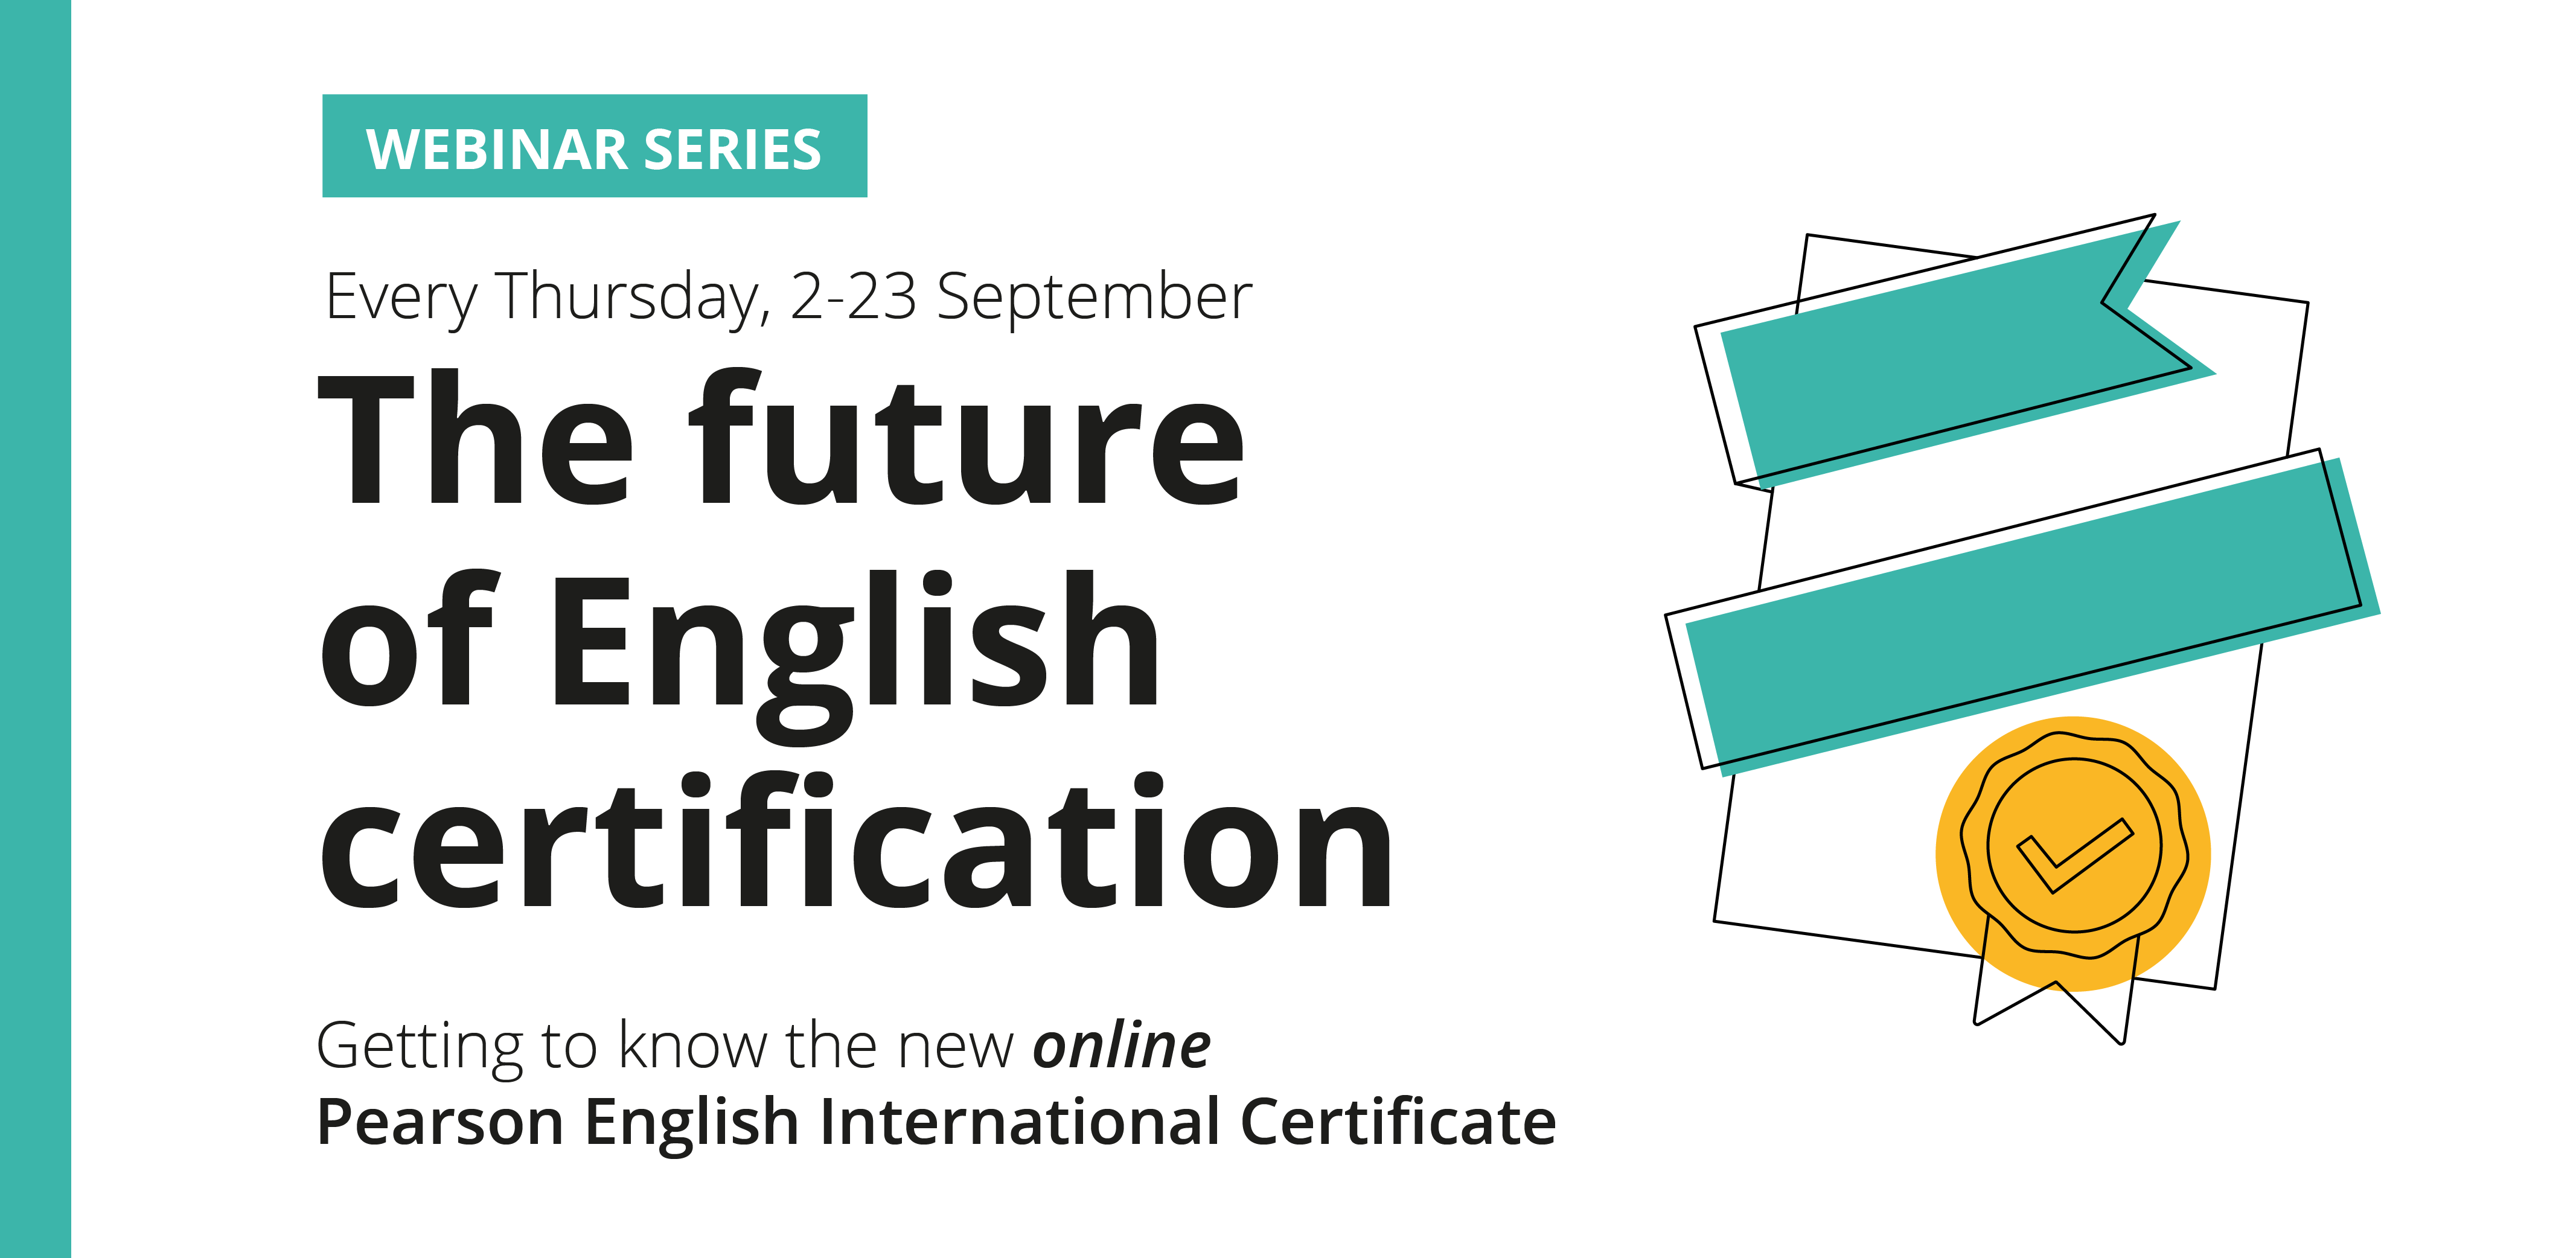 Four free webinars learn about the new, Pearson English ​International Certificate